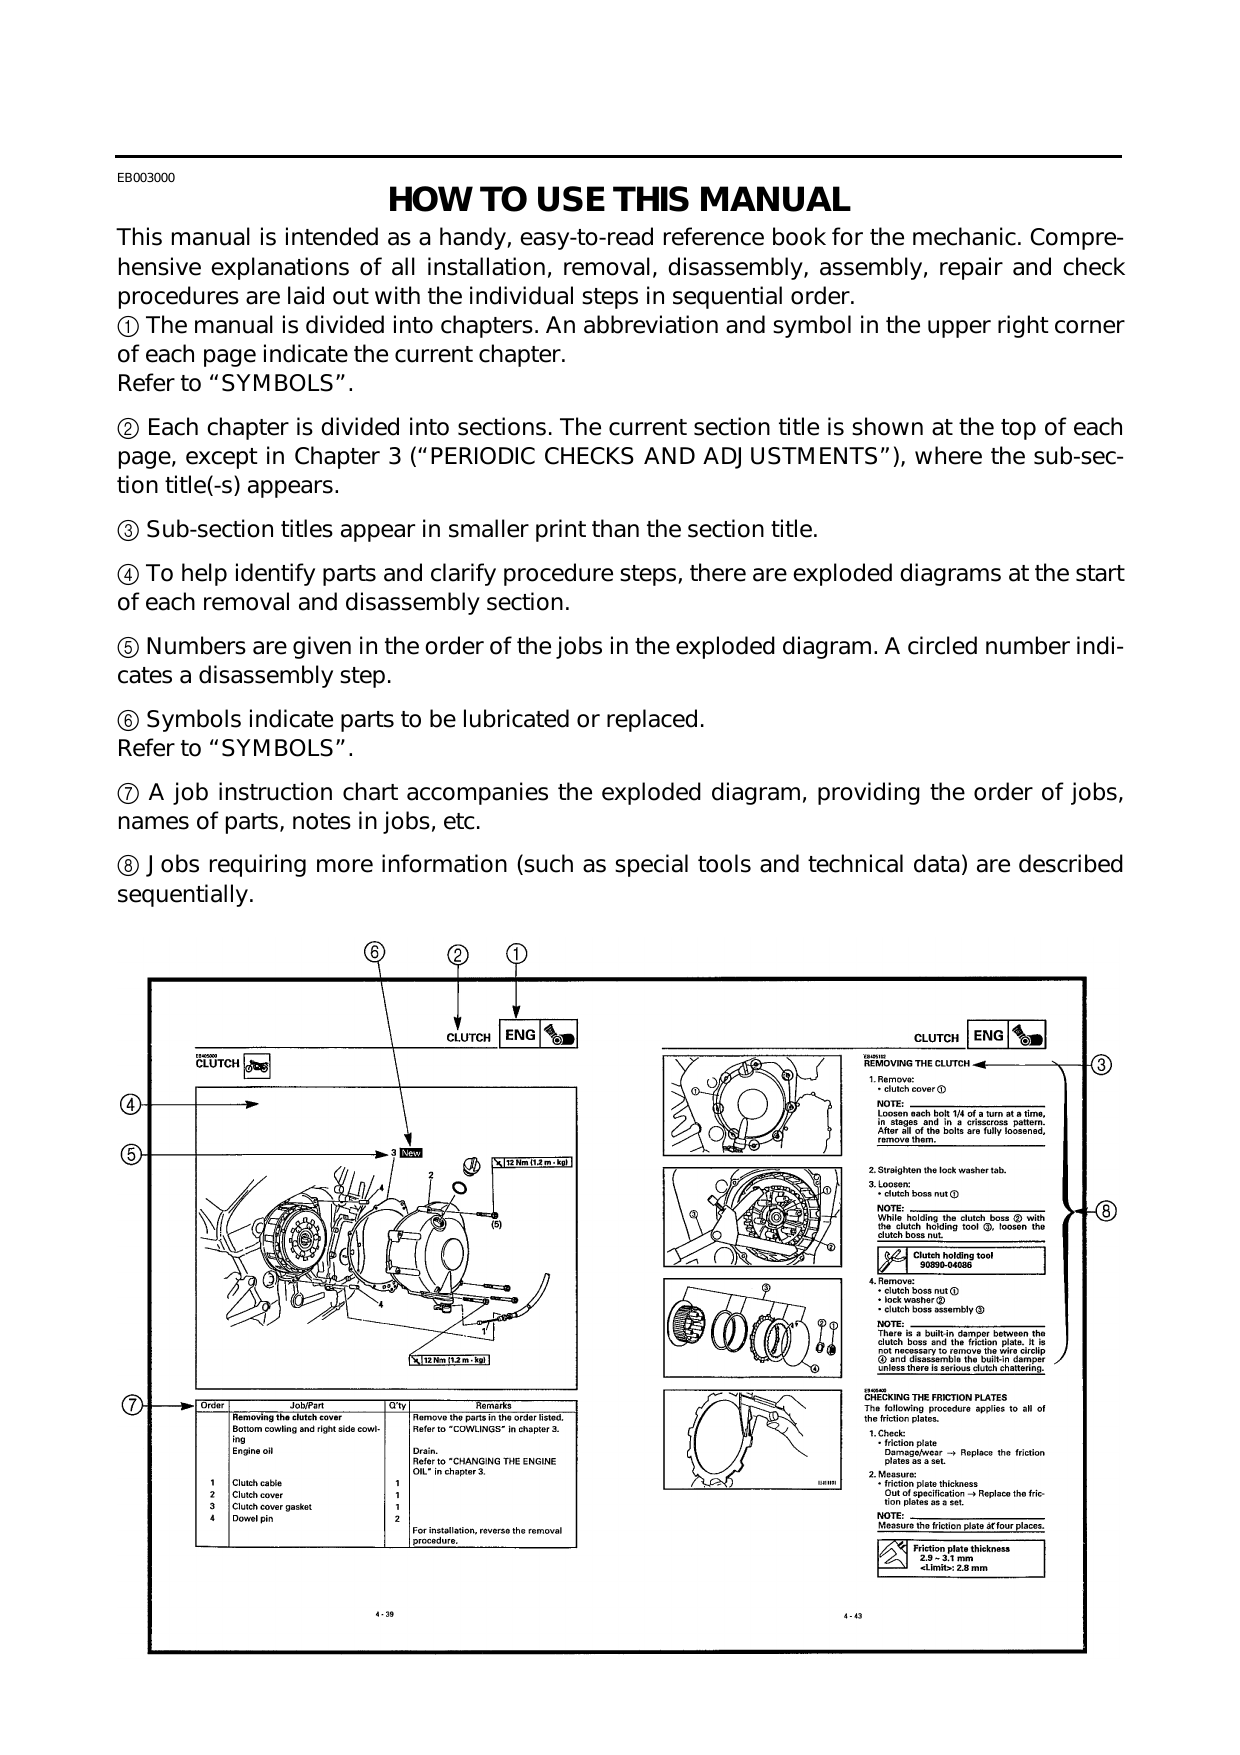 1998-2001 Yamaha YZF-R1 service manual Preview image 4